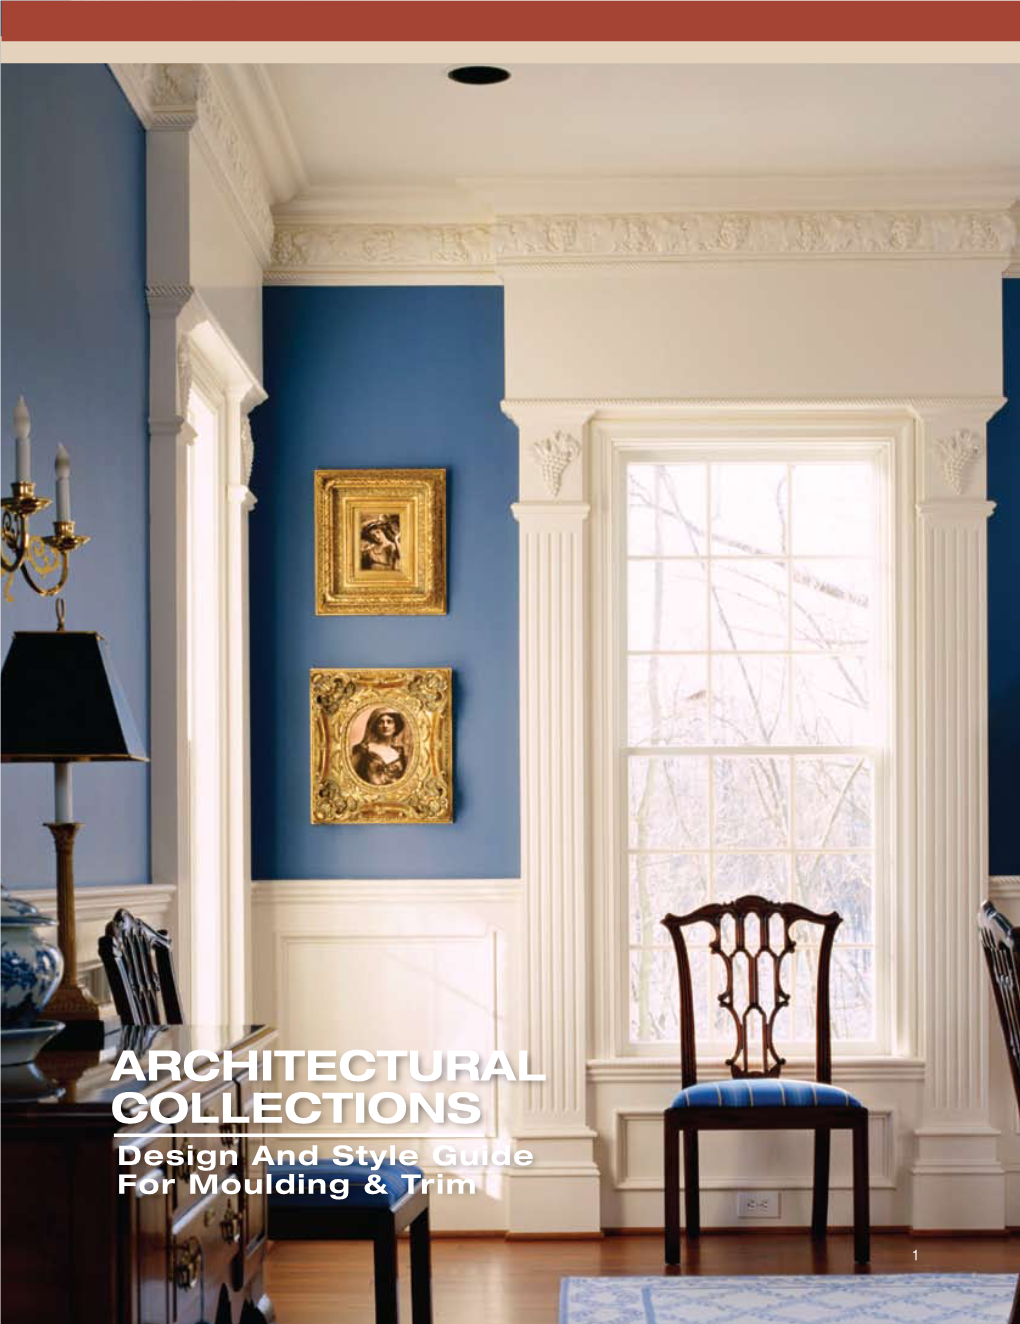 ARCHITECTURAL COLLECTIONS Design and Style Guide for Moulding & Trim